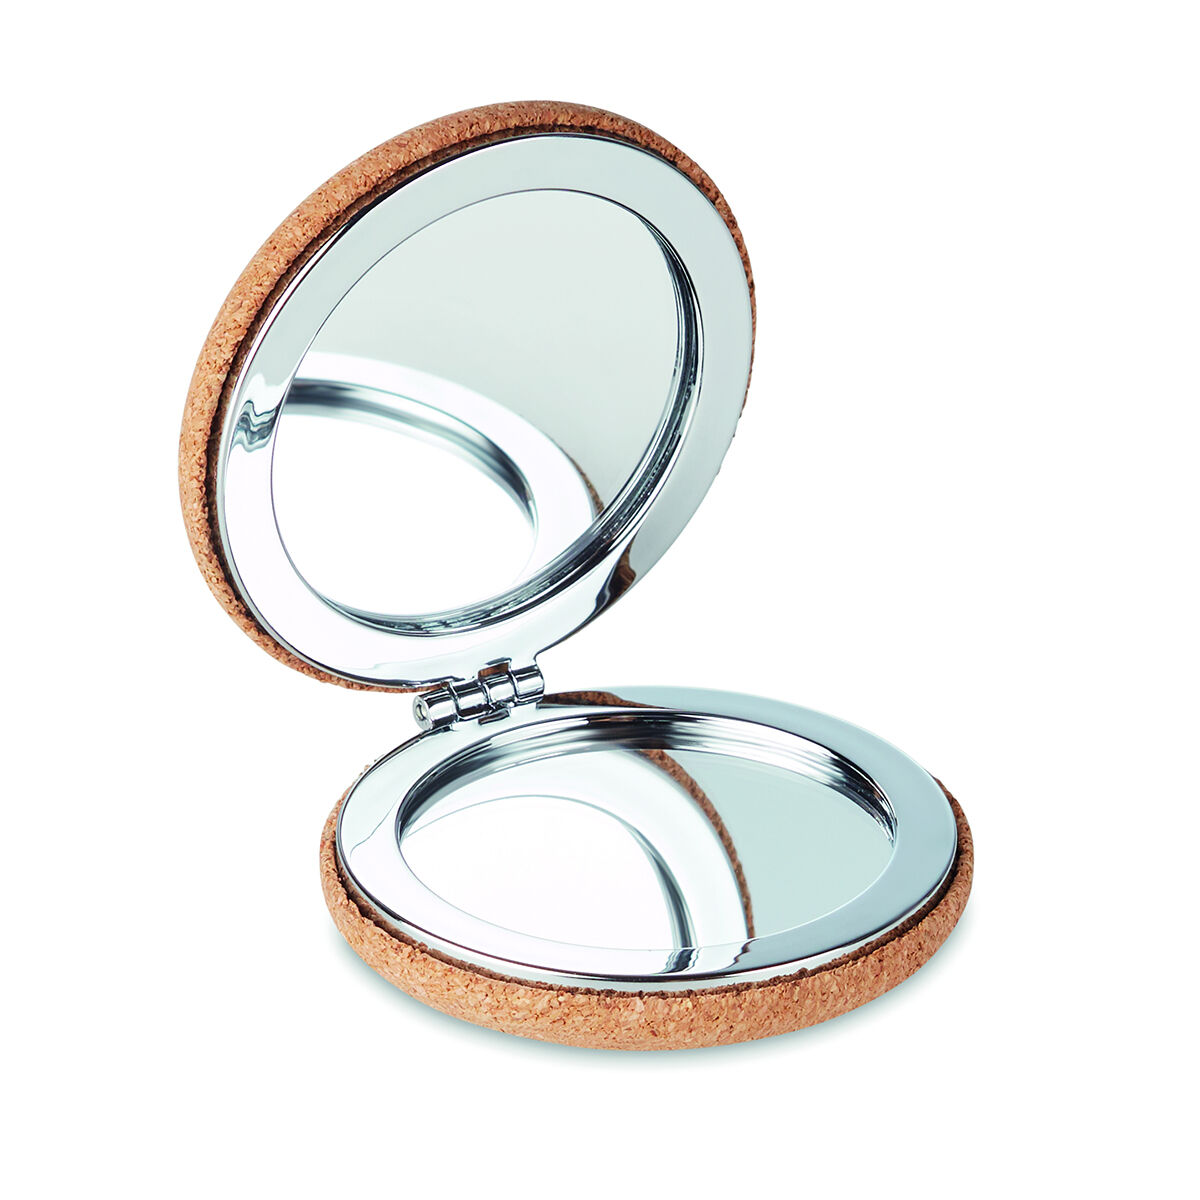 Cork Rounded Compact Mirror